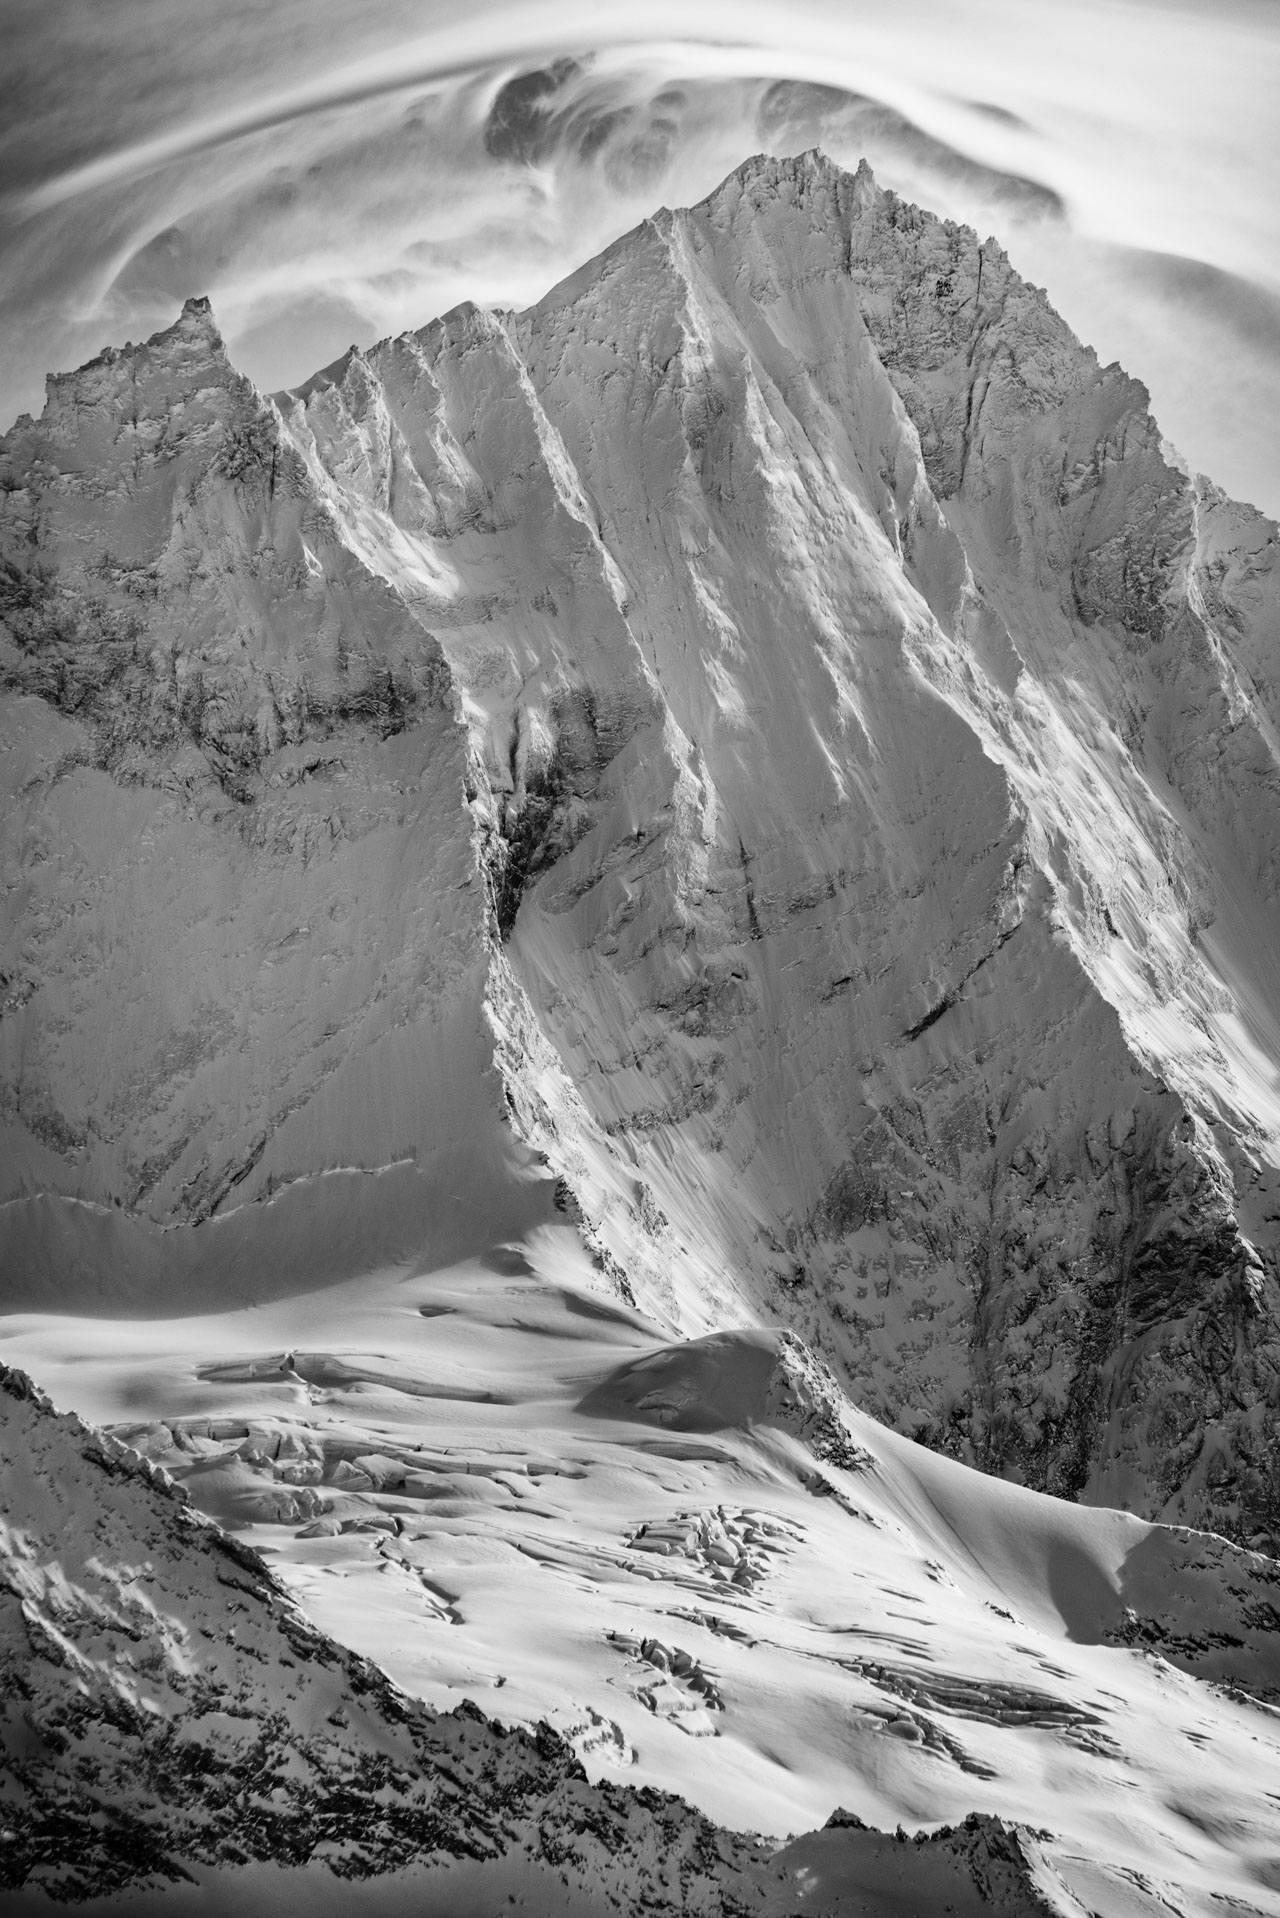 Black and white image of the summit rocky mountain of the Weisshorn from Grimentz in the Valais Alps